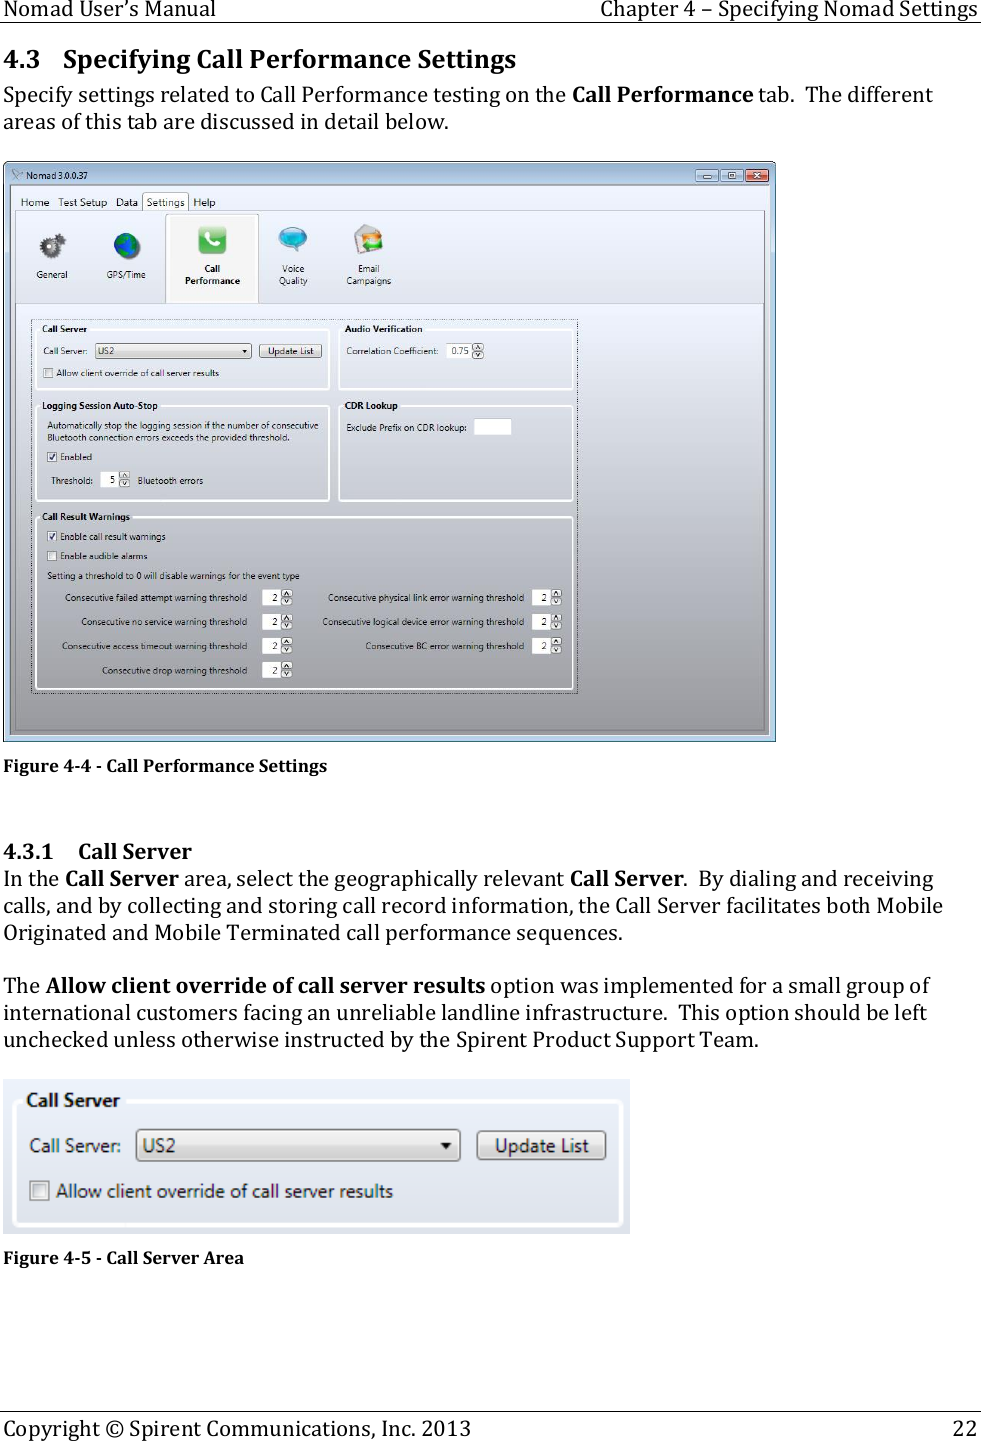  Nomad User’s Manual  Chapter 4 – Specifying Nomad Settings Copyright © Spirent Communications, Inc. 2013    22  4.3 Specifying Call Performance Settings Specify settings related to Call Performance testing on the Call Performance tab.  The different areas of this tab are discussed in detail below.   Figure 4-4 - Call Performance Settings  4.3.1 Call Server In the Call Server area, select the geographically relevant Call Server.  By dialing and receiving calls, and by collecting and storing call record information, the Call Server facilitates both Mobile Originated and Mobile Terminated call performance sequences.  The Allow client override of call server results option was implemented for a small group of international customers facing an unreliable landline infrastructure.  This option should be left unchecked unless otherwise instructed by the Spirent Product Support Team.   Figure 4-5 - Call Server Area  